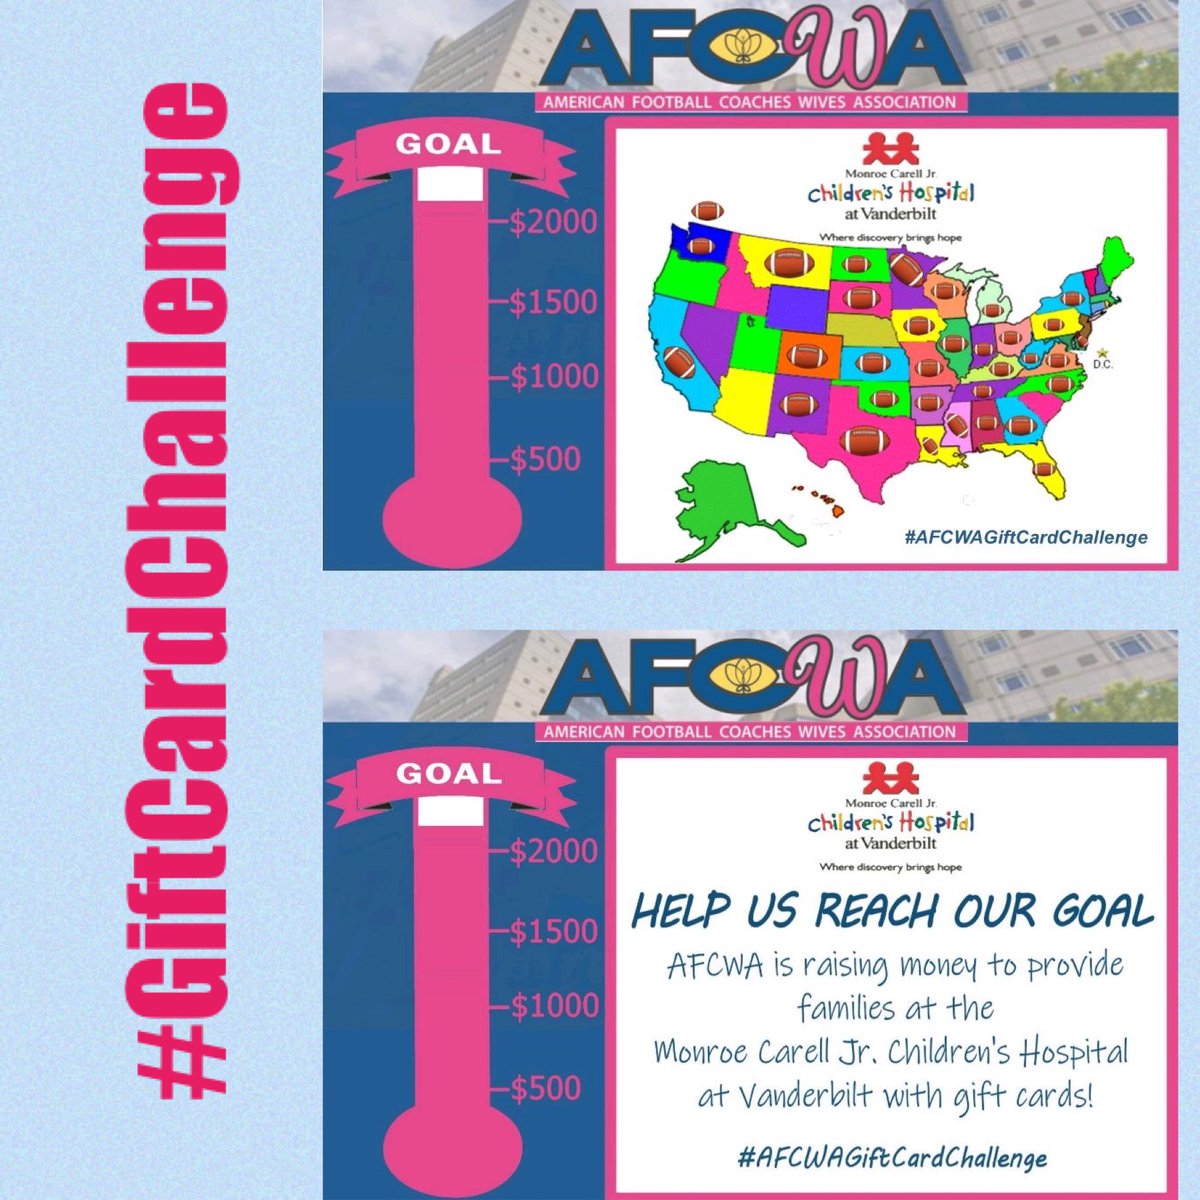 We are SO close to meeting our goal!Our AFCWA #giftcardchallenge helps lighten the load for families with sick children! No amount is too small! Click the link afcwa.org/afcwa-gift-car… to donate!

ID, WY, NE, HI, AZ, ME, NH, VT, MA, NY, DE, RI & CT we need you!
#afcwa20